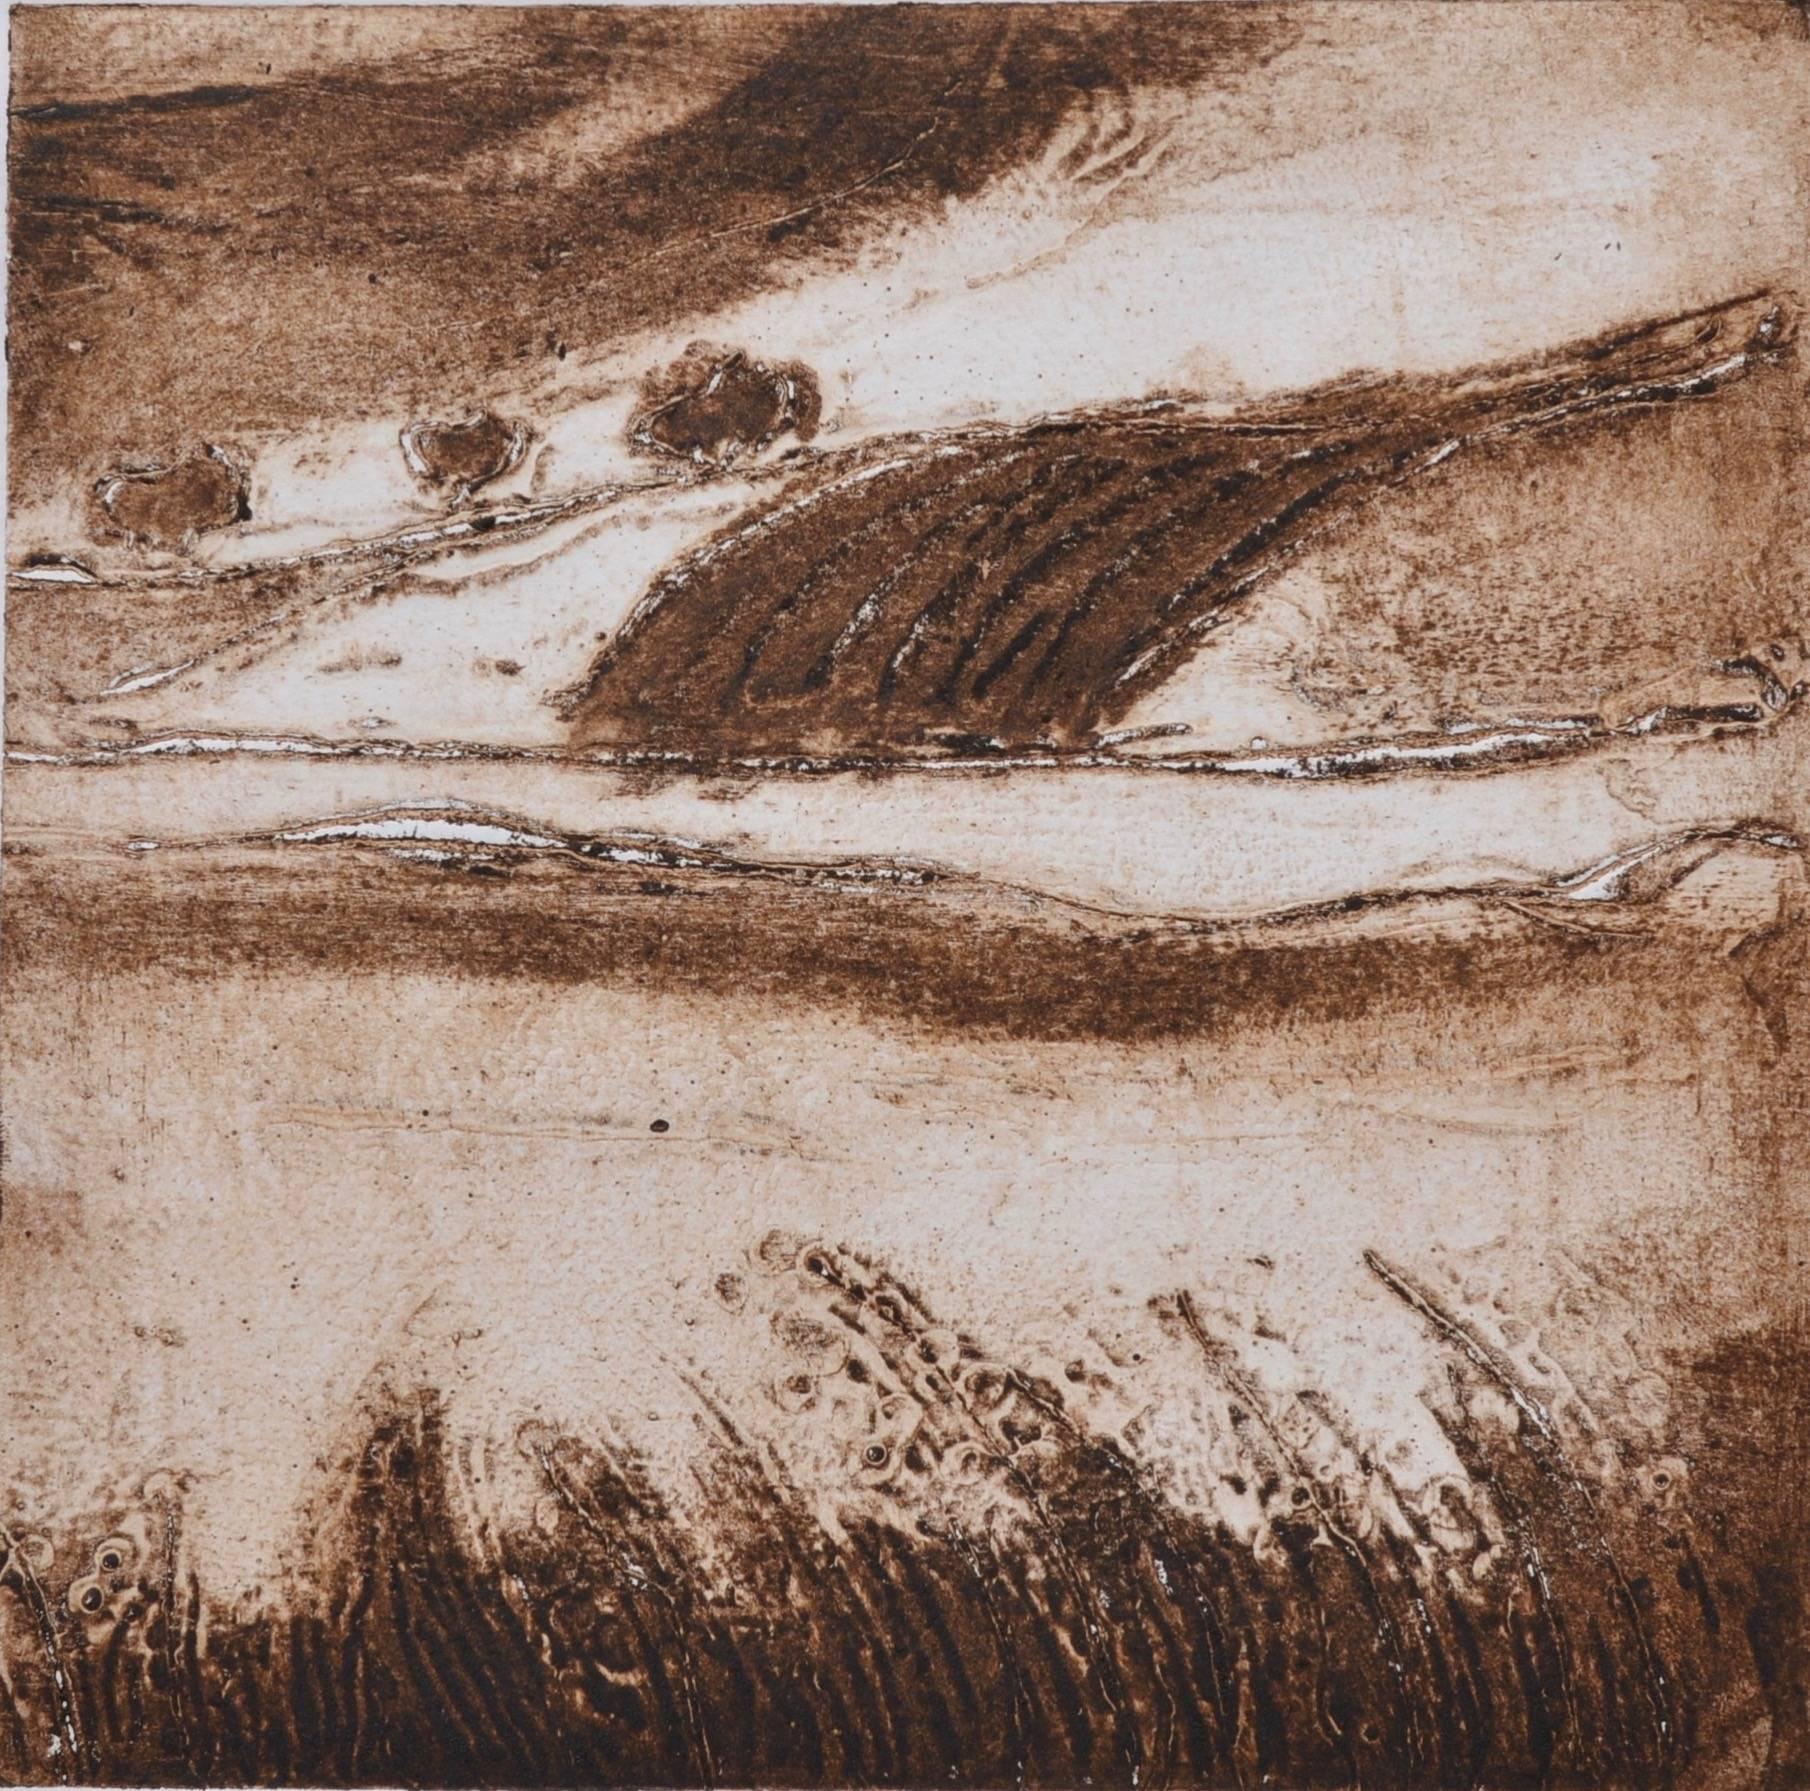 Serpia English Landscape: Contemporary Limited Edition Etching